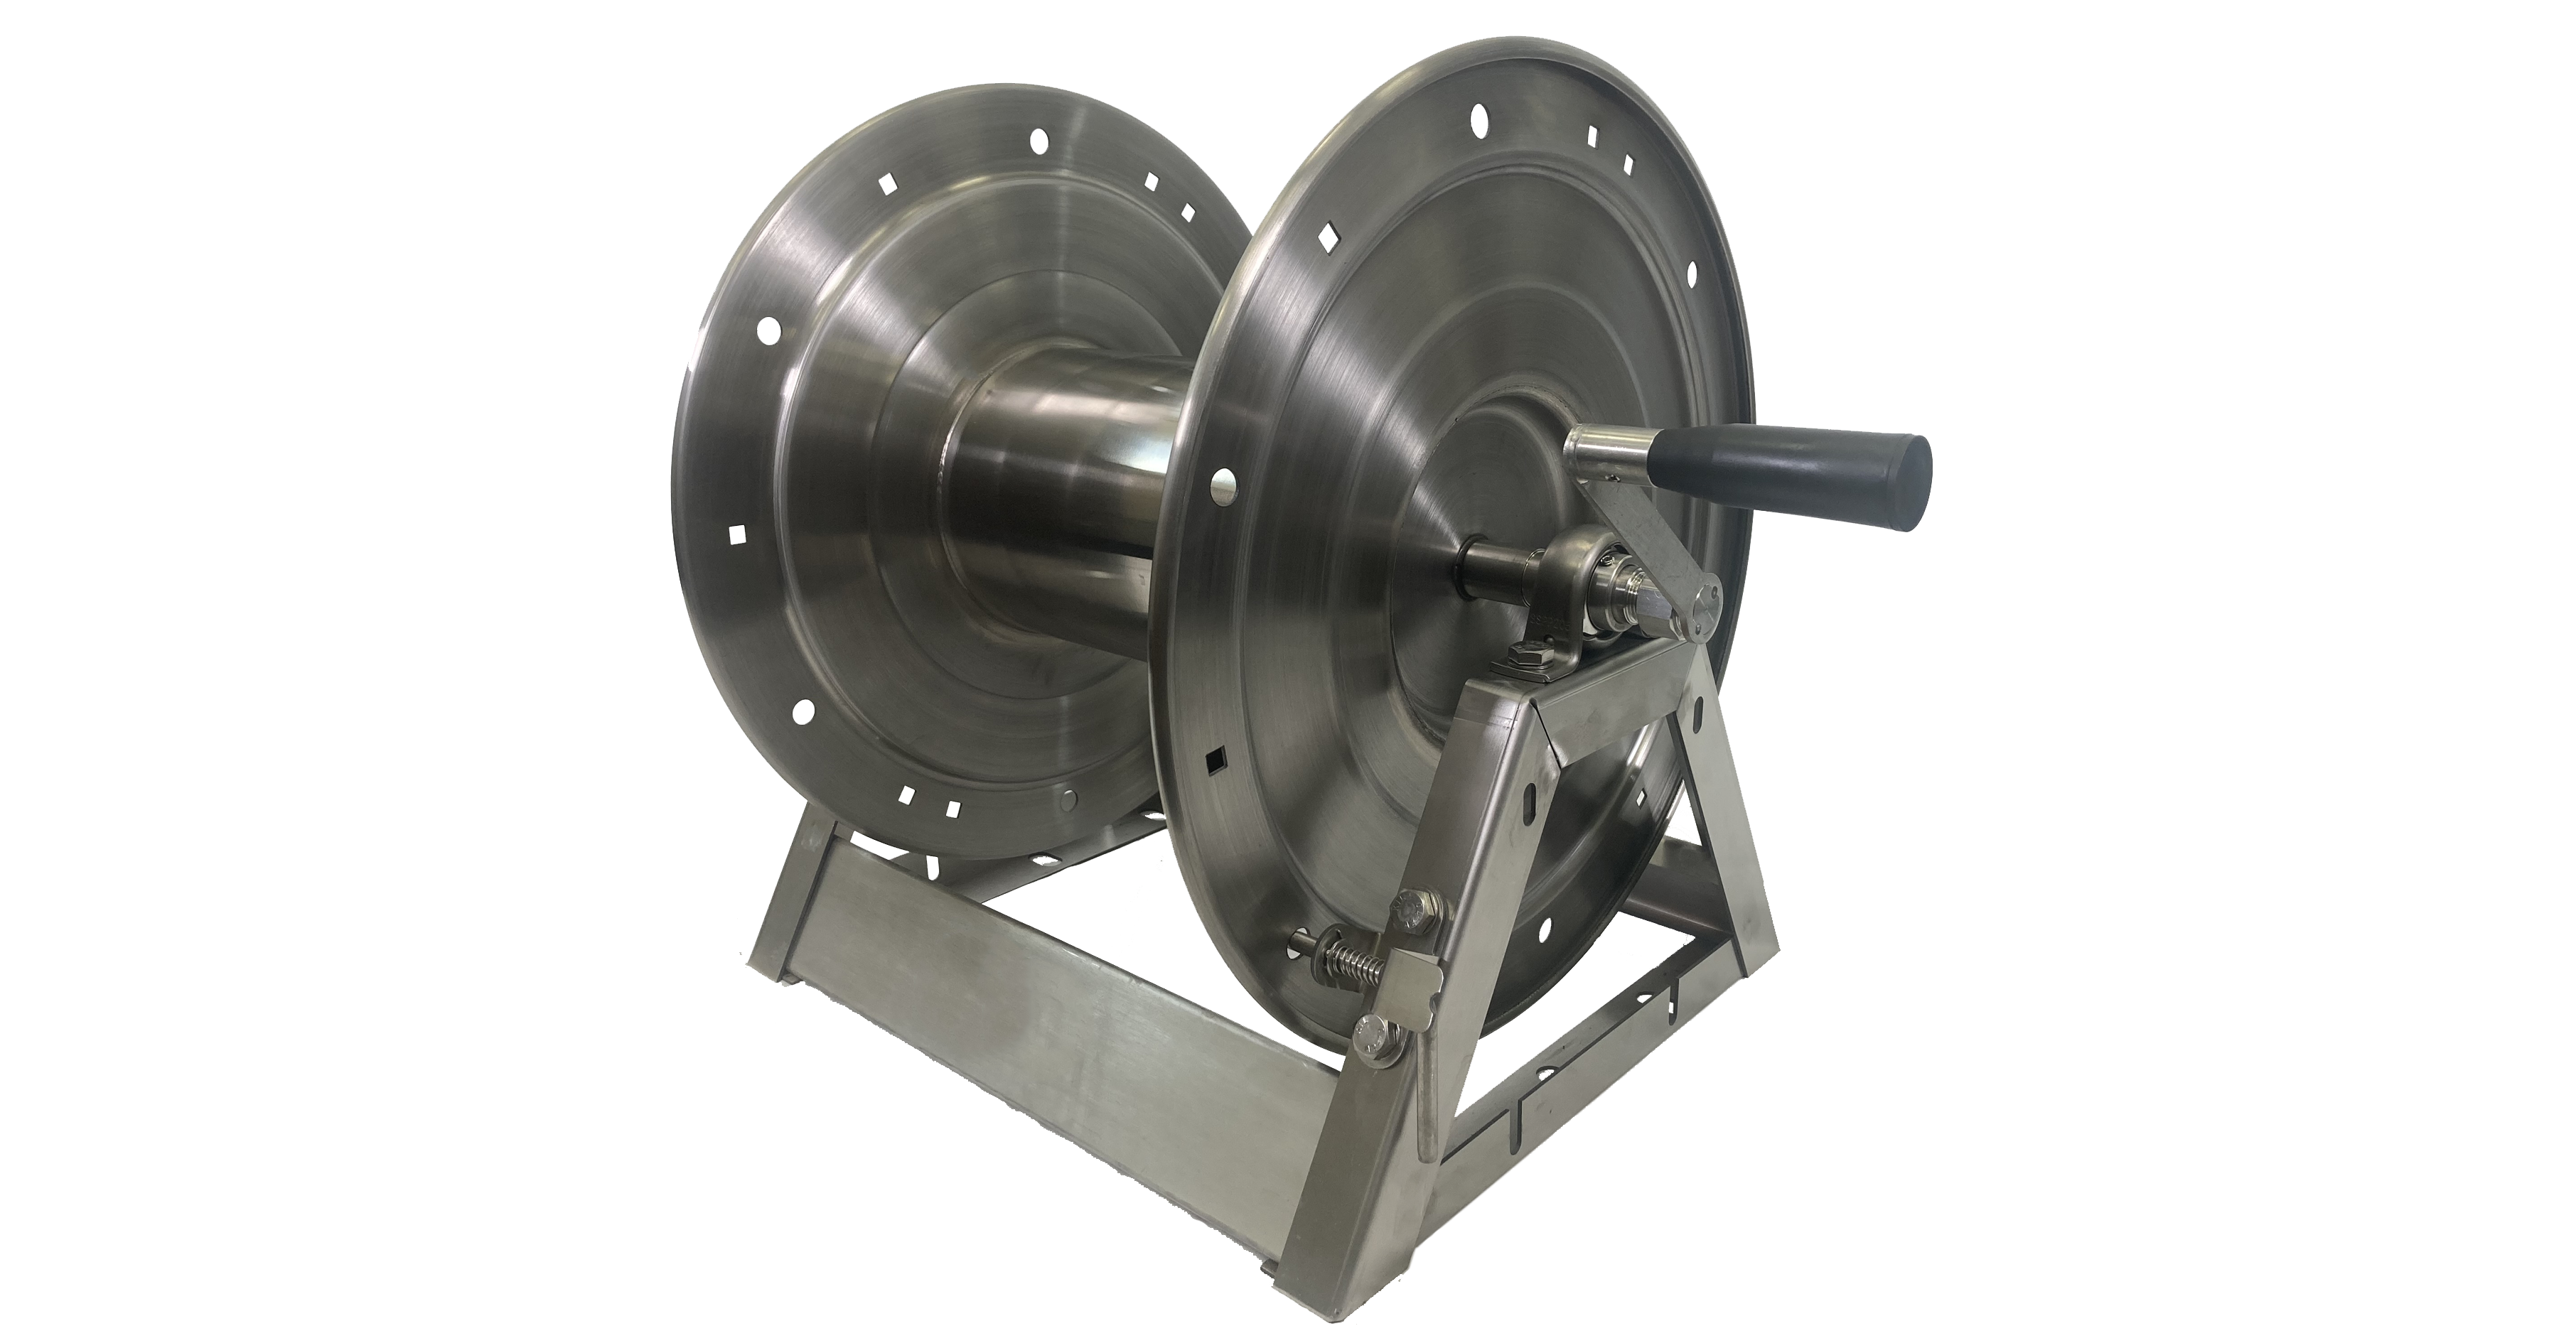 Hose Reel High Pressure 300' x 3/8 inch - Stainless Steel A-frame